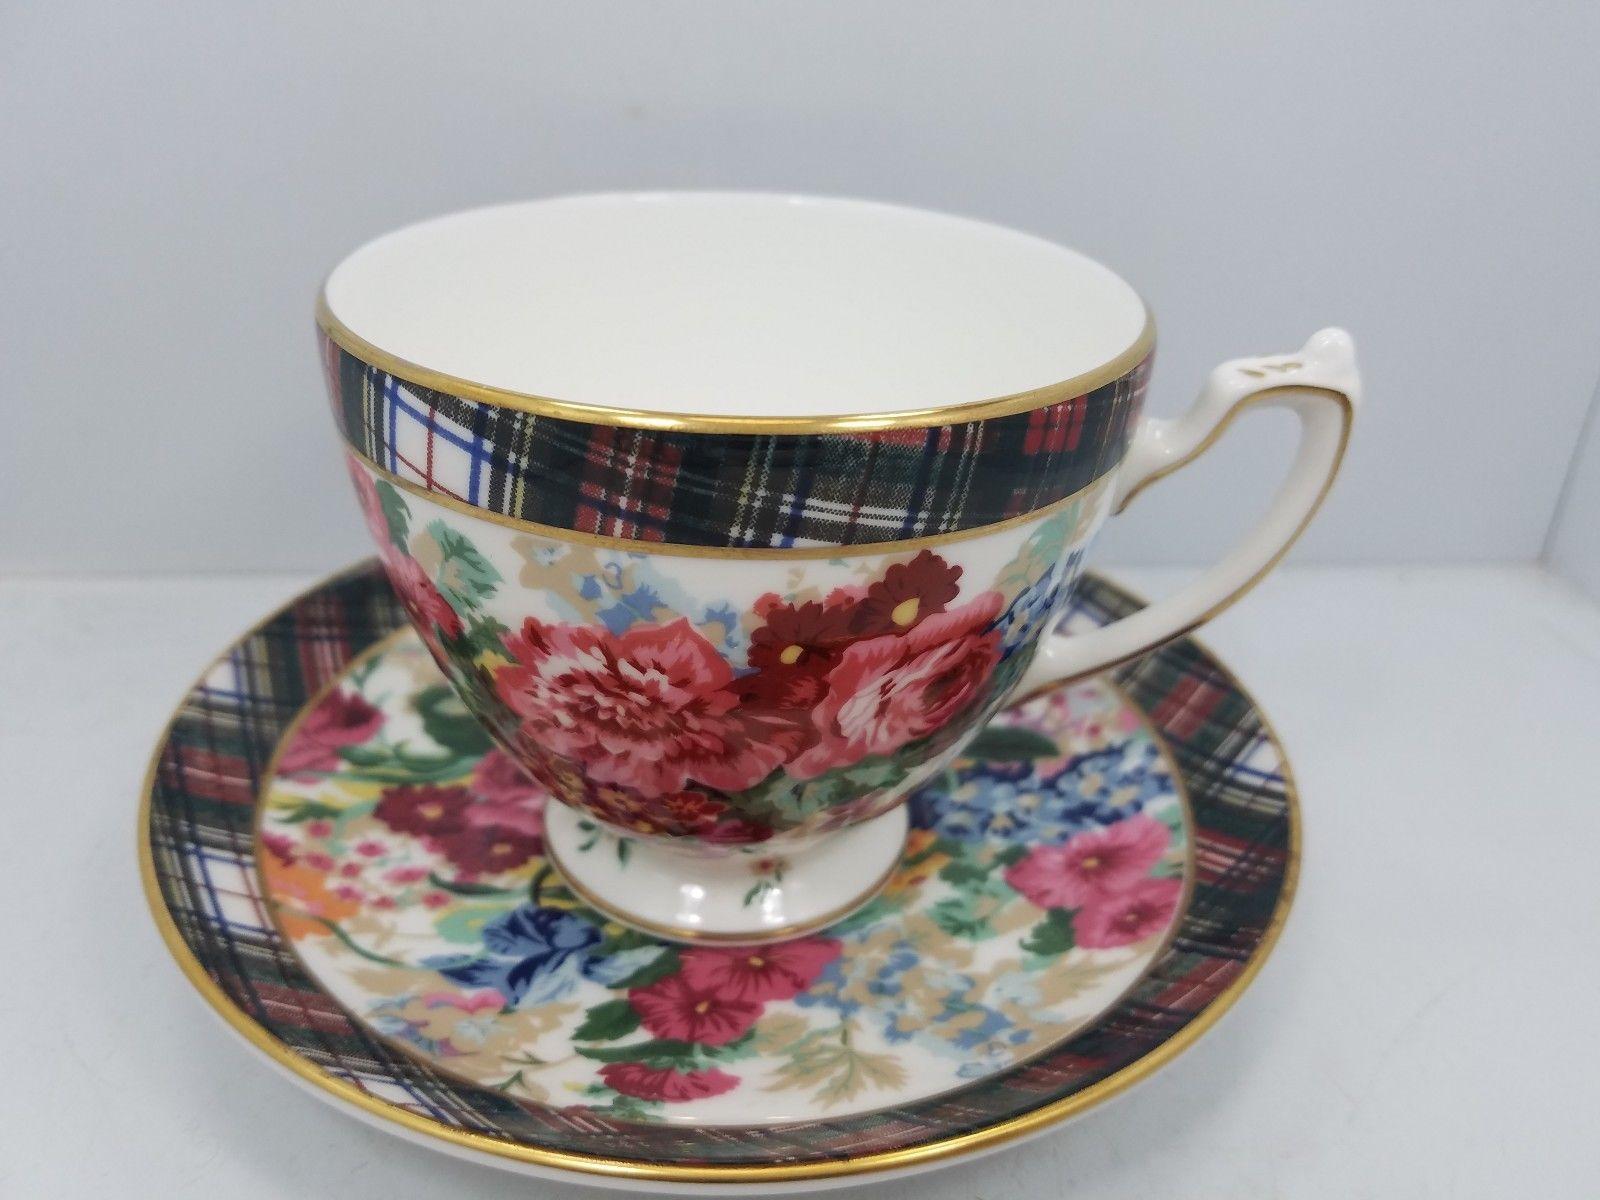 A set of 8 (eight) place settings in the Hampton Floral pattern by Ralph Lauren Home Collection for Wedgwood. Porcelain. Signed, circa 1995-1996.

Features a tartan border with colorful floral pattern on white with gold rim. 

A total of 40